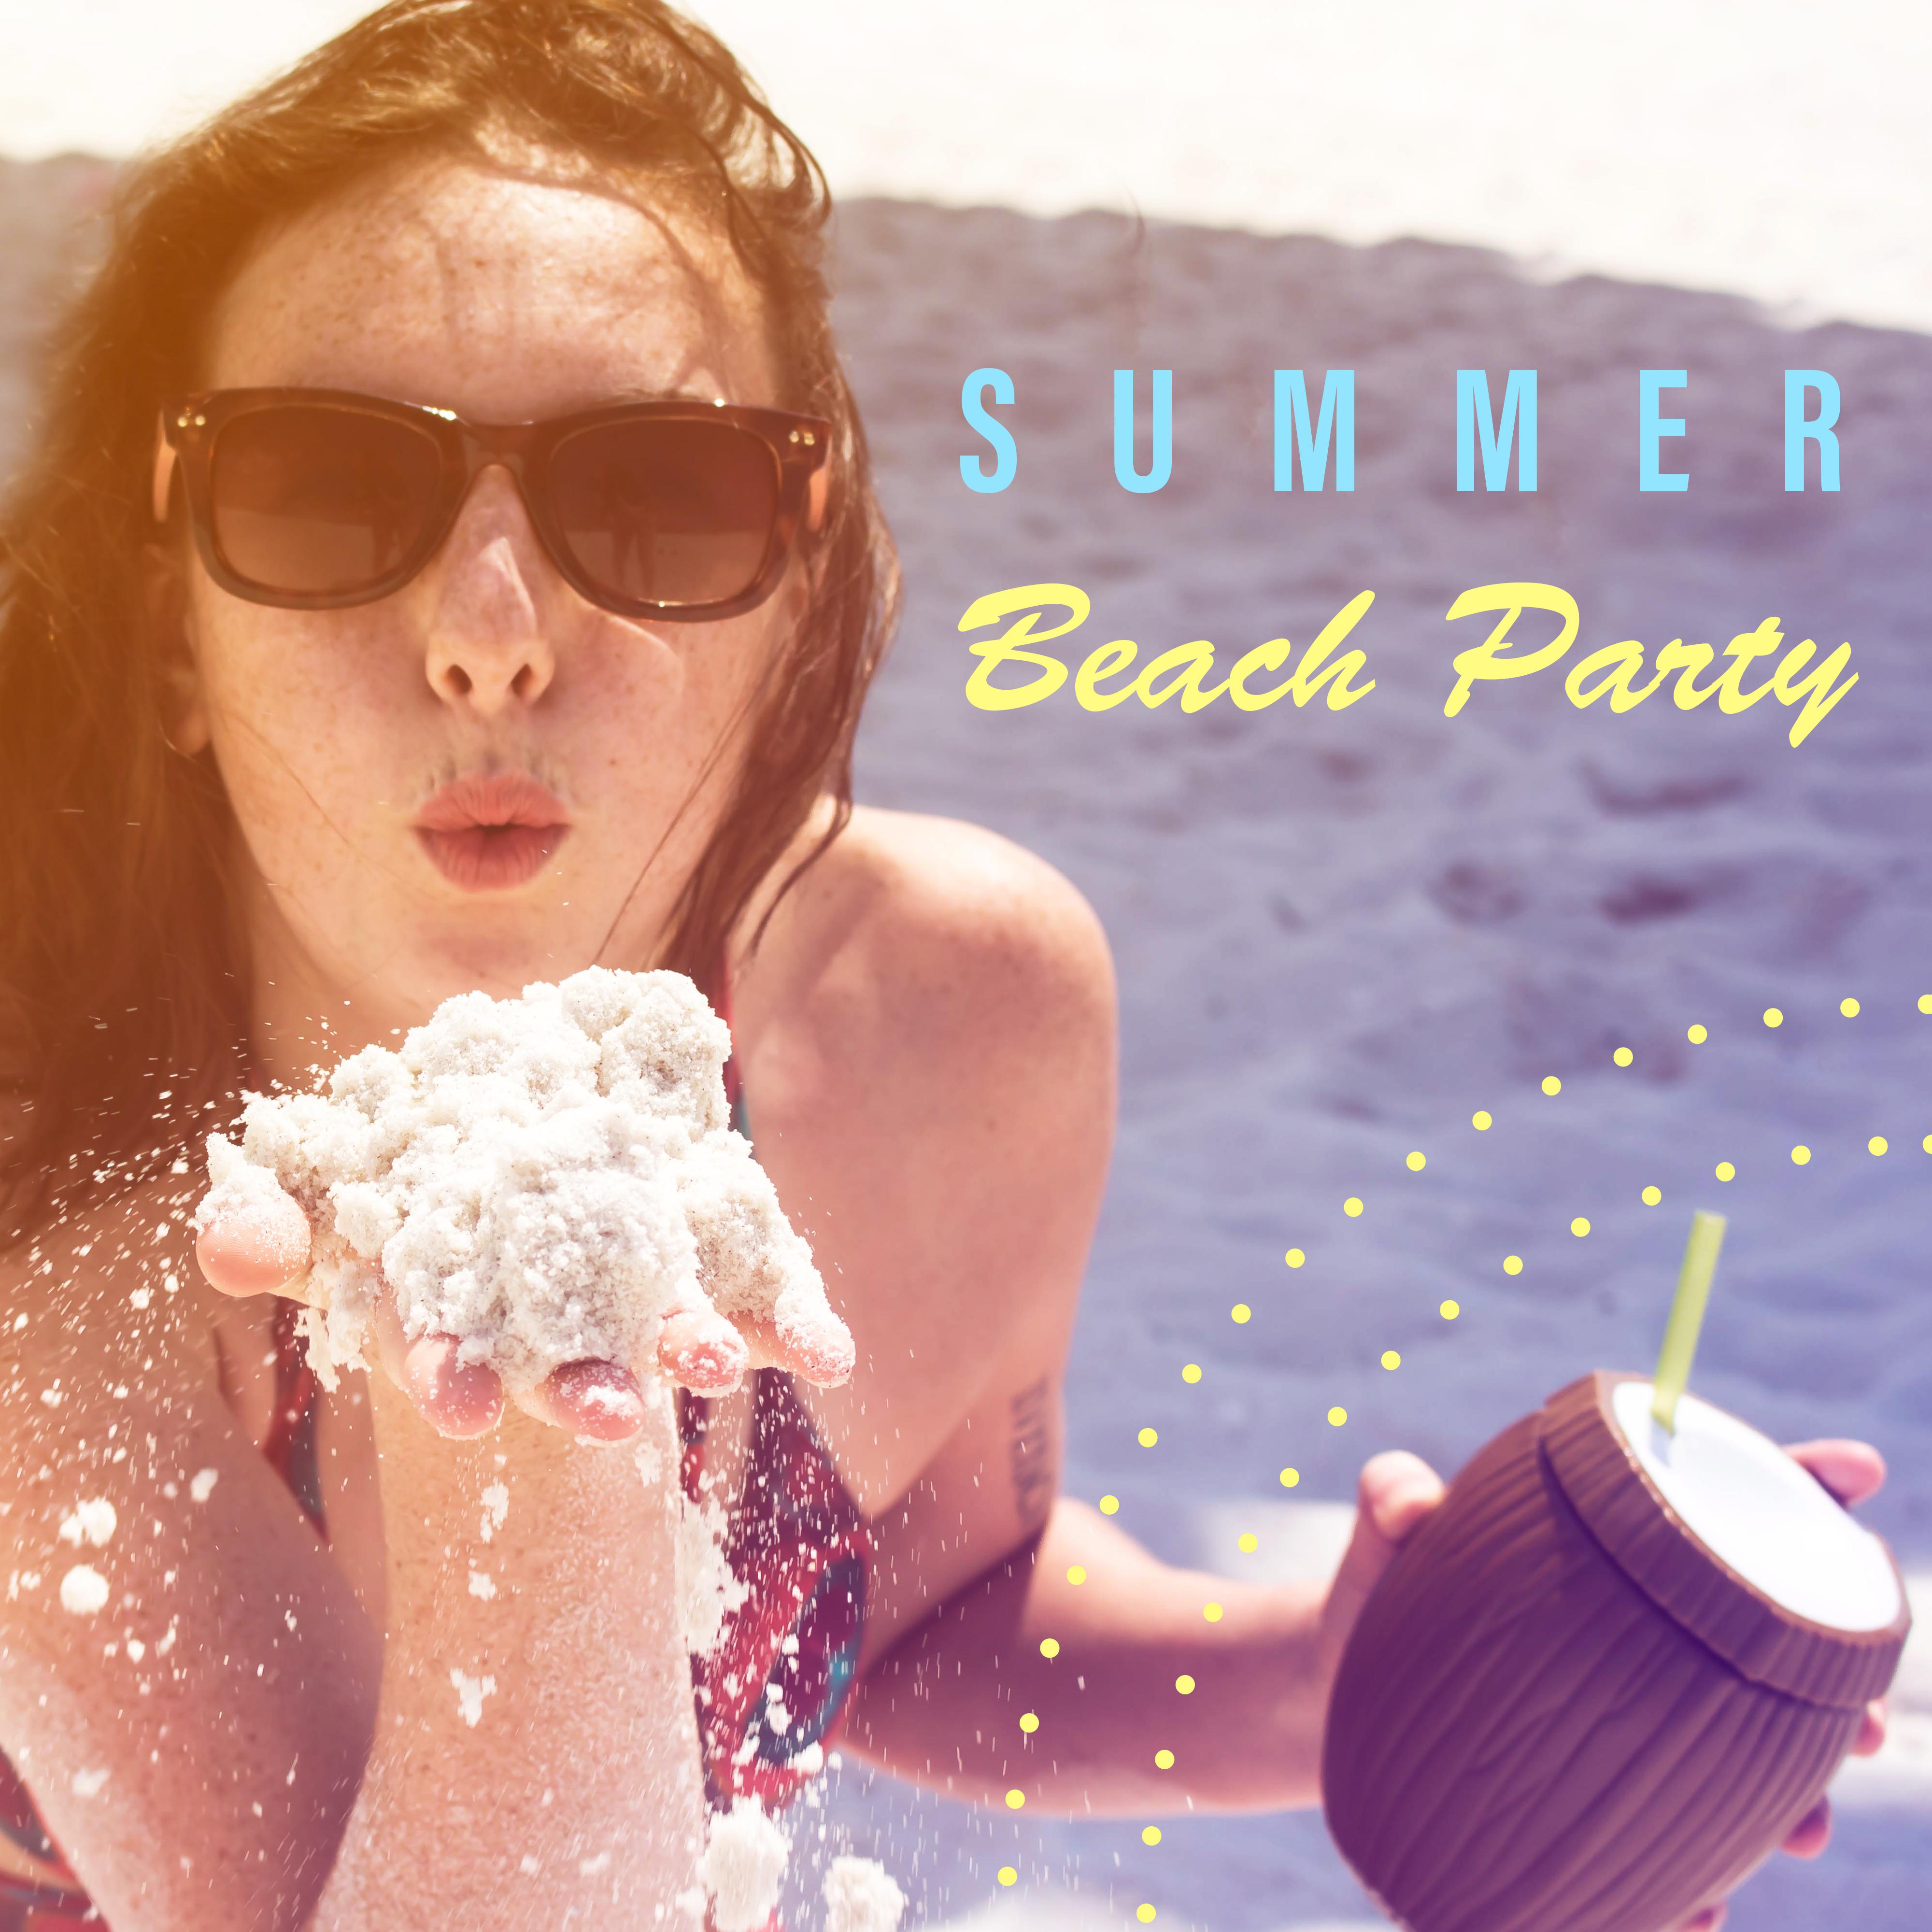 Summer Beach Party  Ibiza Relaxation, Sounds to Have Fun, Chill Out Music, Rest  Relax